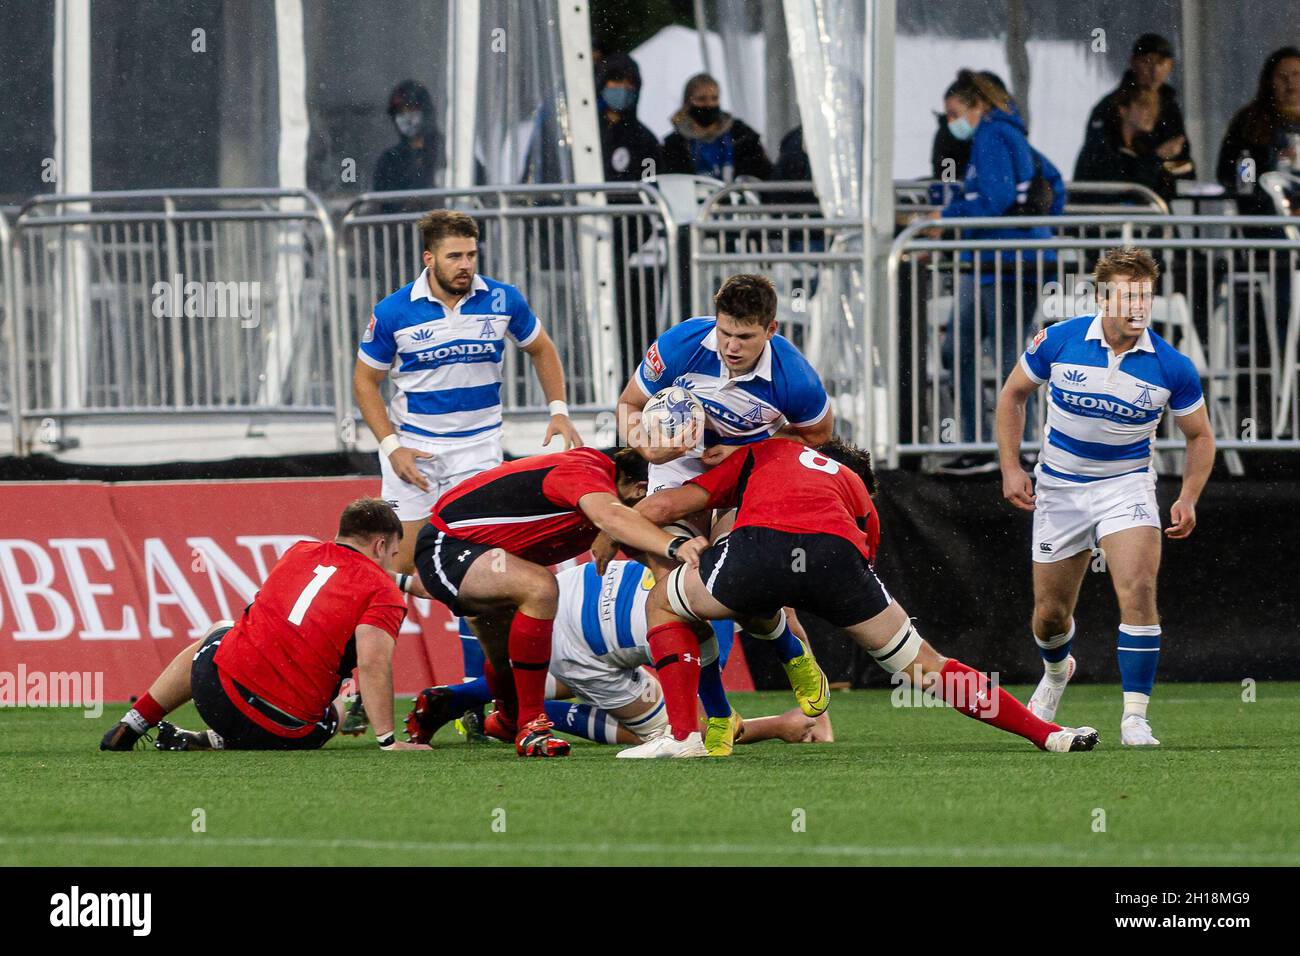 Toronto, Canada, October 16, 2021: Toronto Arrows (blue-white) in action against Atlantic Selects (red-black) during the Rugby Rally match at York Stadium in Toronto, Canada. Toronto Arrows defeat Alantic Selects witth the score 57-10 Stock Photo